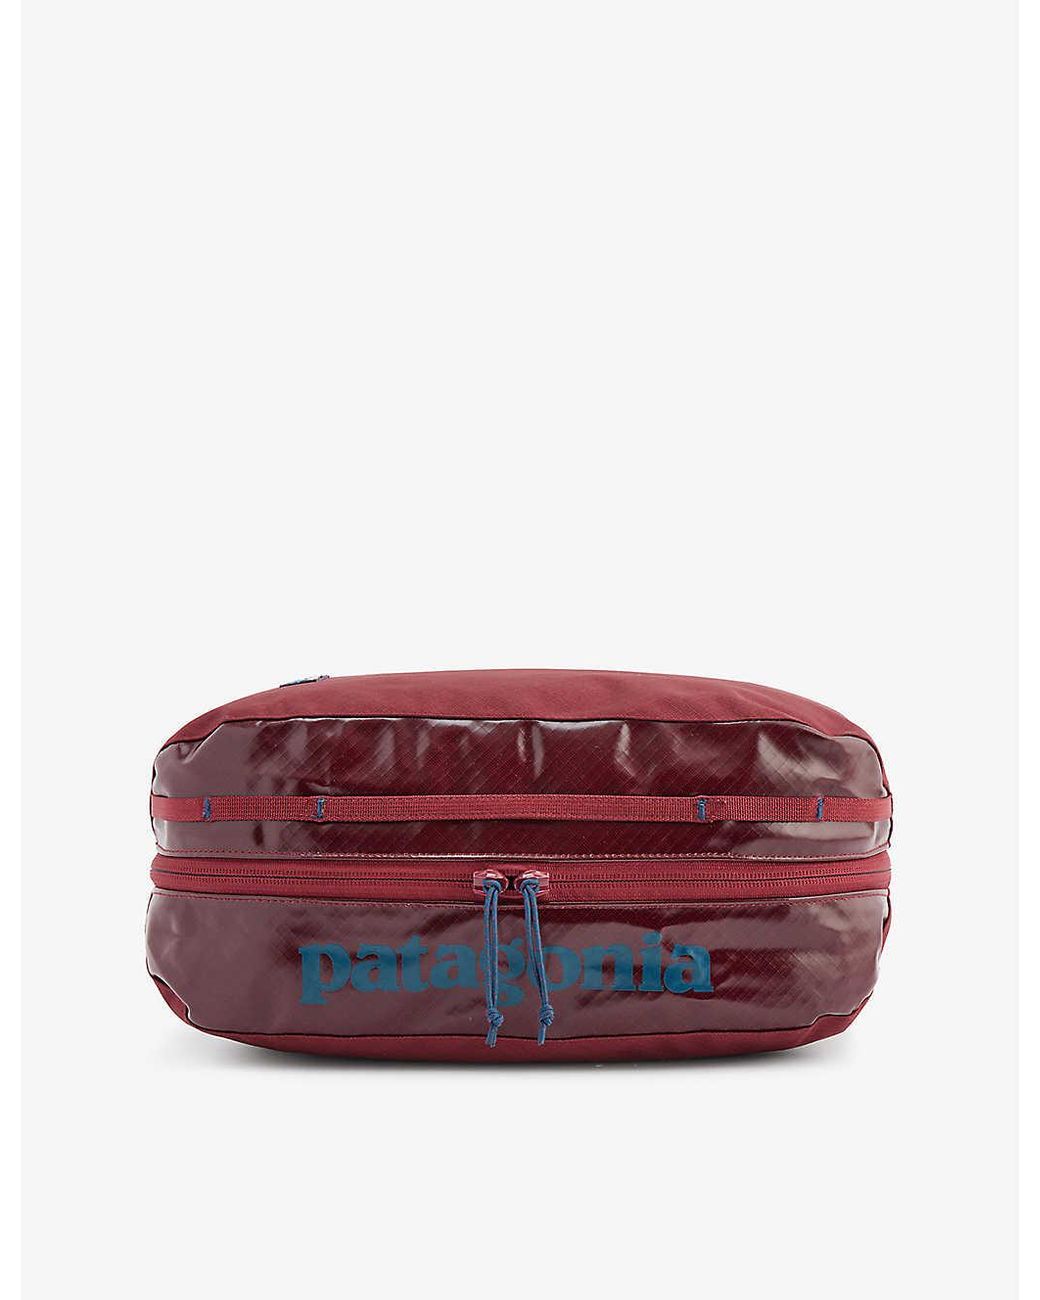 Polyester Red Big Travel Bags